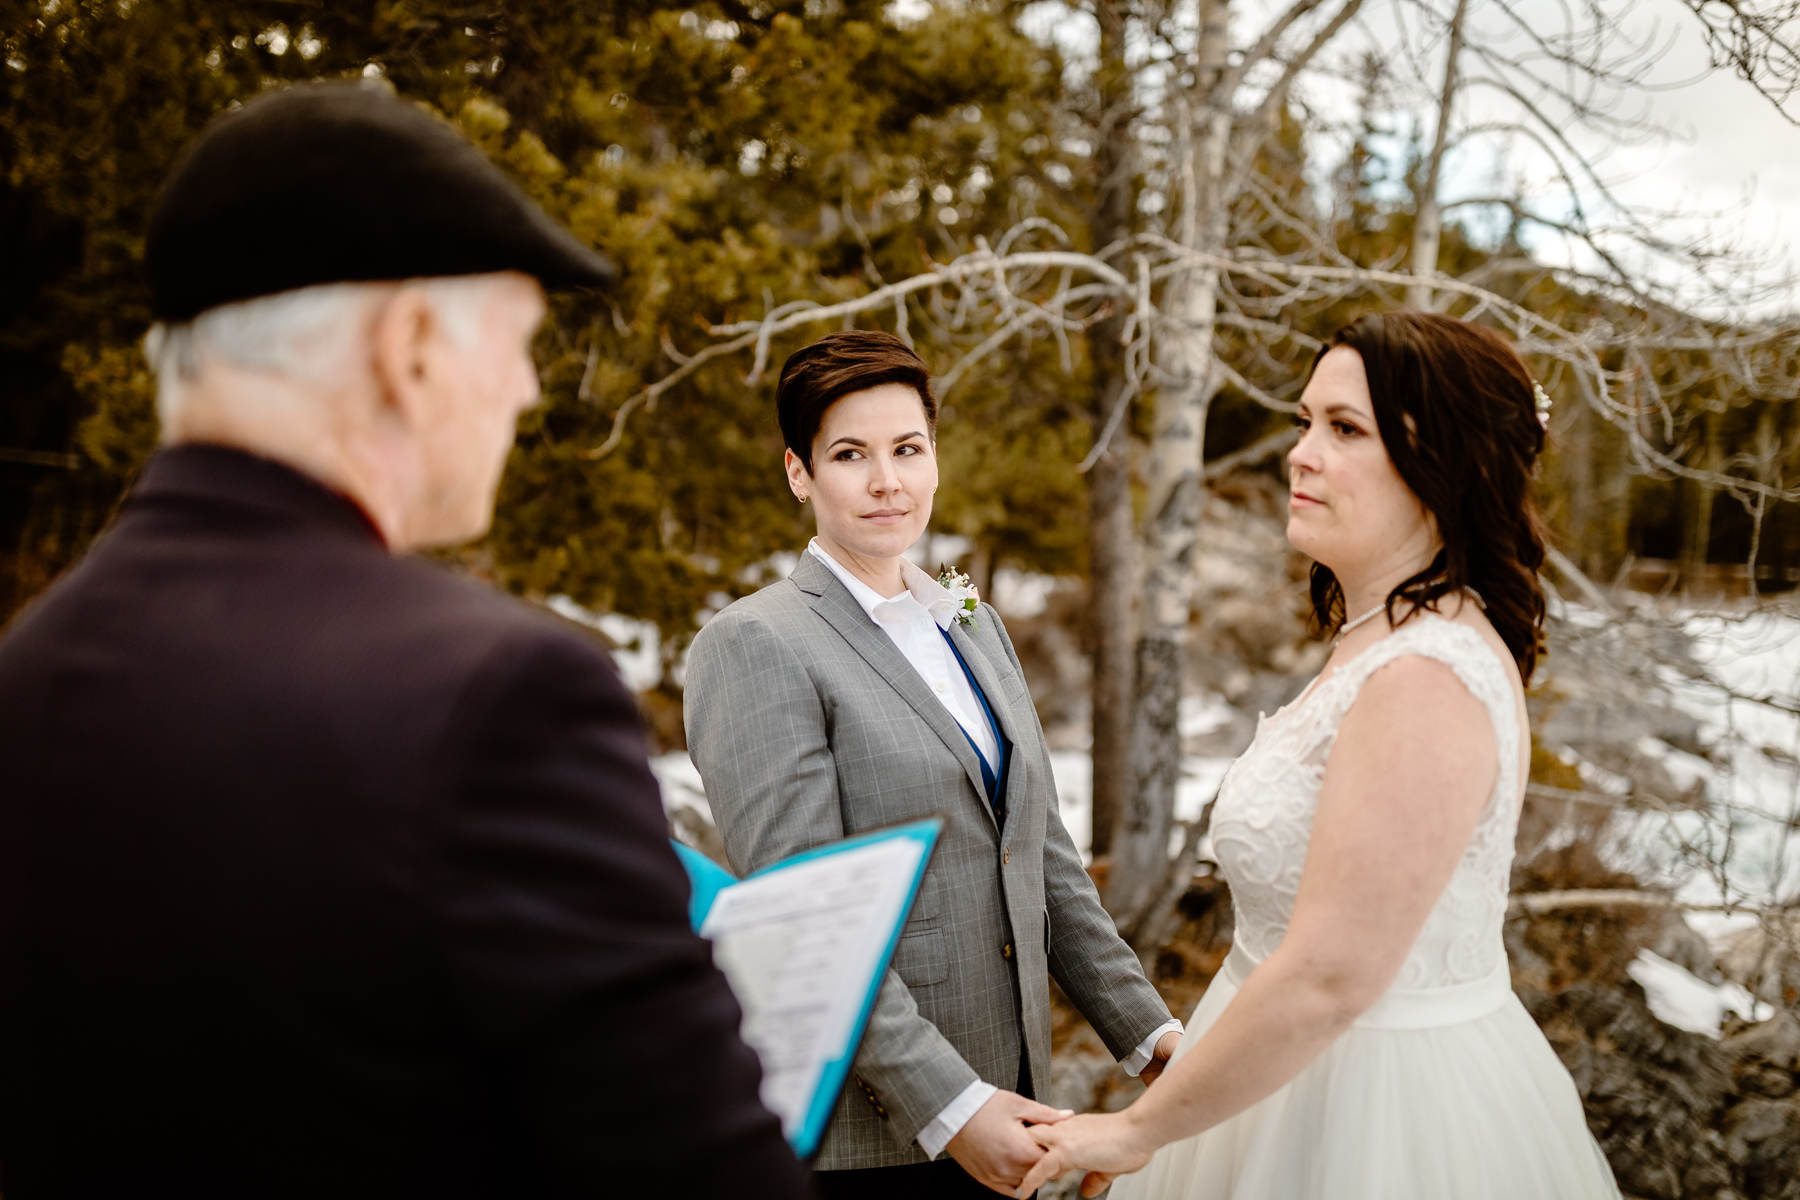 Banff National Park Elopement Photography with LGBTQ-friendly photographers - Image 20